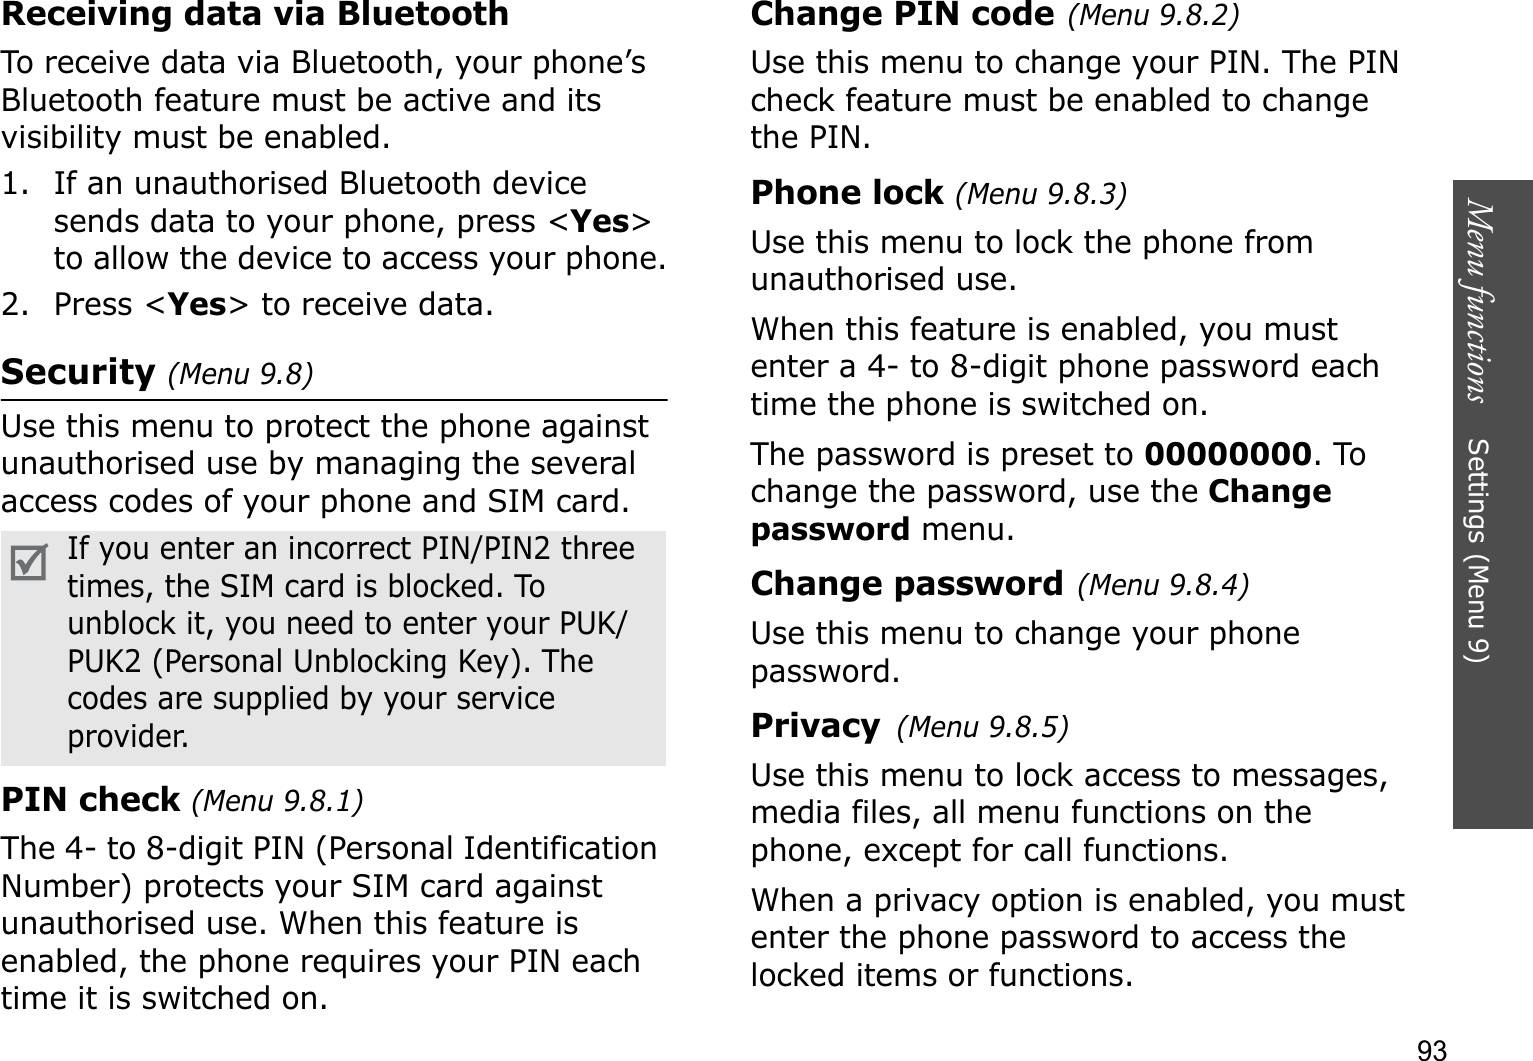 Menu functions    Settings (Menu 9)93Receiving data via BluetoothTo receive data via Bluetooth, your phone’s Bluetooth feature must be active and its visibility must be enabled.1. If an unauthorised Bluetooth device sends data to your phone, press &lt;Yes&gt;to allow the device to access your phone.2. Press &lt;Yes&gt; to receive data.Security (Menu 9.8)Use this menu to protect the phone against unauthorised use by managing the several access codes of your phone and SIM card.PIN check (Menu 9.8.1)The 4- to 8-digit PIN (Personal Identification Number) protects your SIM card against unauthorised use. When this feature is enabled, the phone requires your PIN each time it is switched on.Change PIN code(Menu 9.8.2)Use this menu to change your PIN. The PIN check feature must be enabled to change the PIN.Phone lock (Menu 9.8.3)Use this menu to lock the phone from unauthorised use. When this feature is enabled, you must enter a 4- to 8-digit phone password each time the phone is switched on.The password is preset to 00000000. To change the password, use the Change password menu.Change password(Menu 9.8.4)Use this menu to change your phone password.Privacy(Menu 9.8.5)Use this menu to lock access to messages, media files, all menu functions on the phone, except for call functions. When a privacy option is enabled, you must enter the phone password to access the locked items or functions. If you enter an incorrect PIN/PIN2 three times, the SIM card is blocked. To unblock it, you need to enter your PUK/PUK2 (Personal Unblocking Key). The codes are supplied by your service provider.